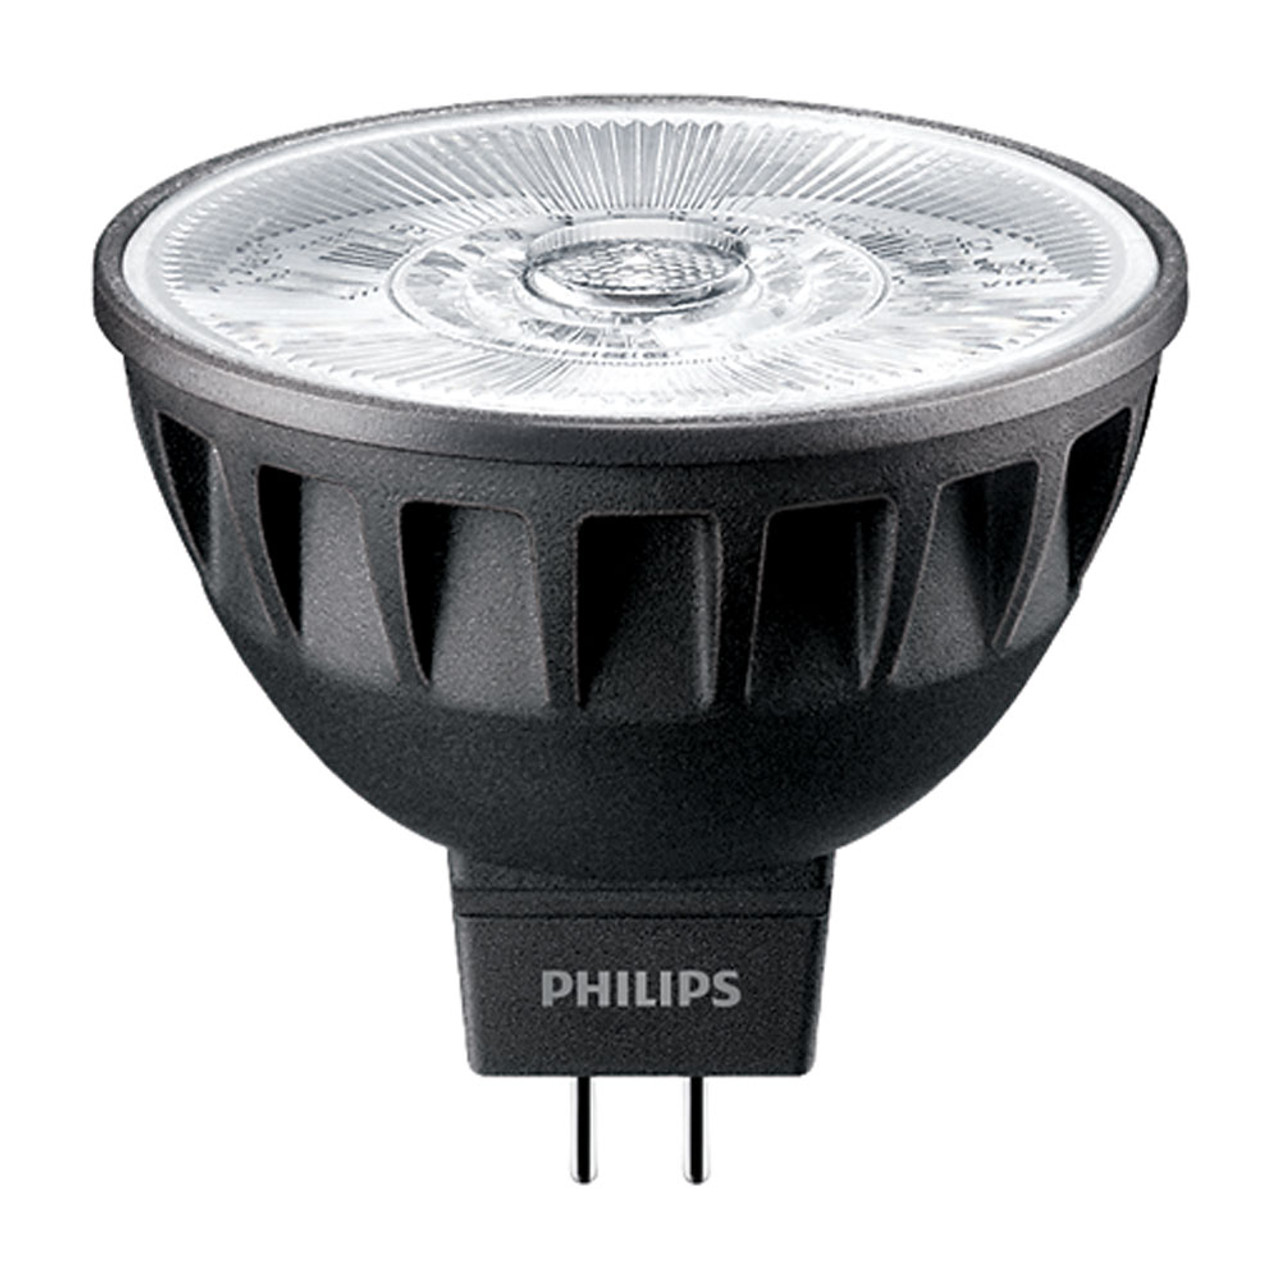 Philips Master LED 12V 6.7W (35W) Very Warm White 36 Degrees Dimmable RA97